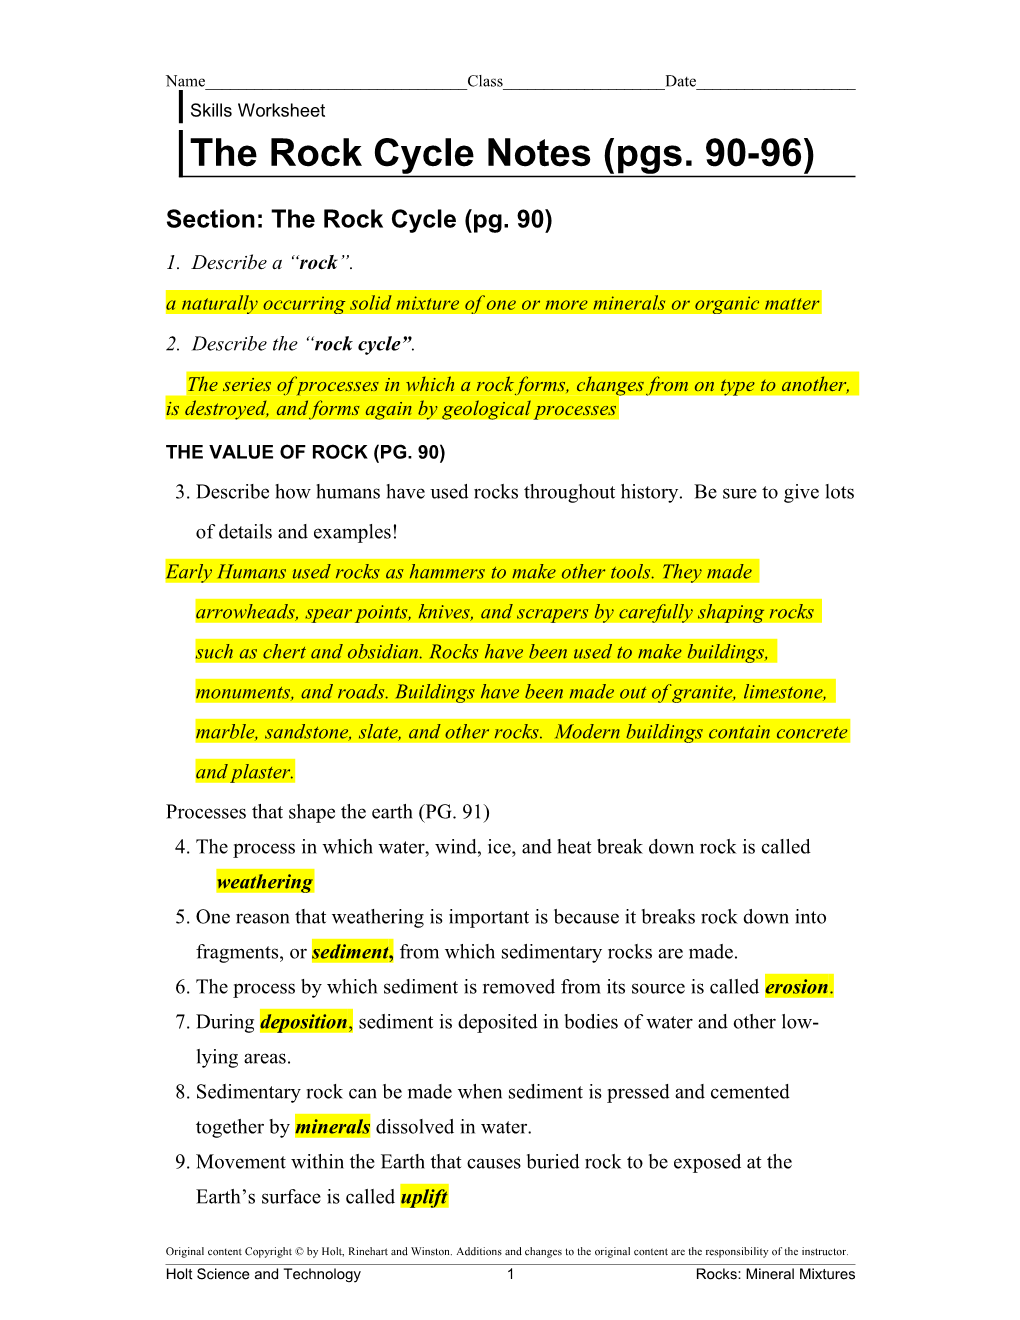 The Rock Cycle Notes (Pgs. 90-96)